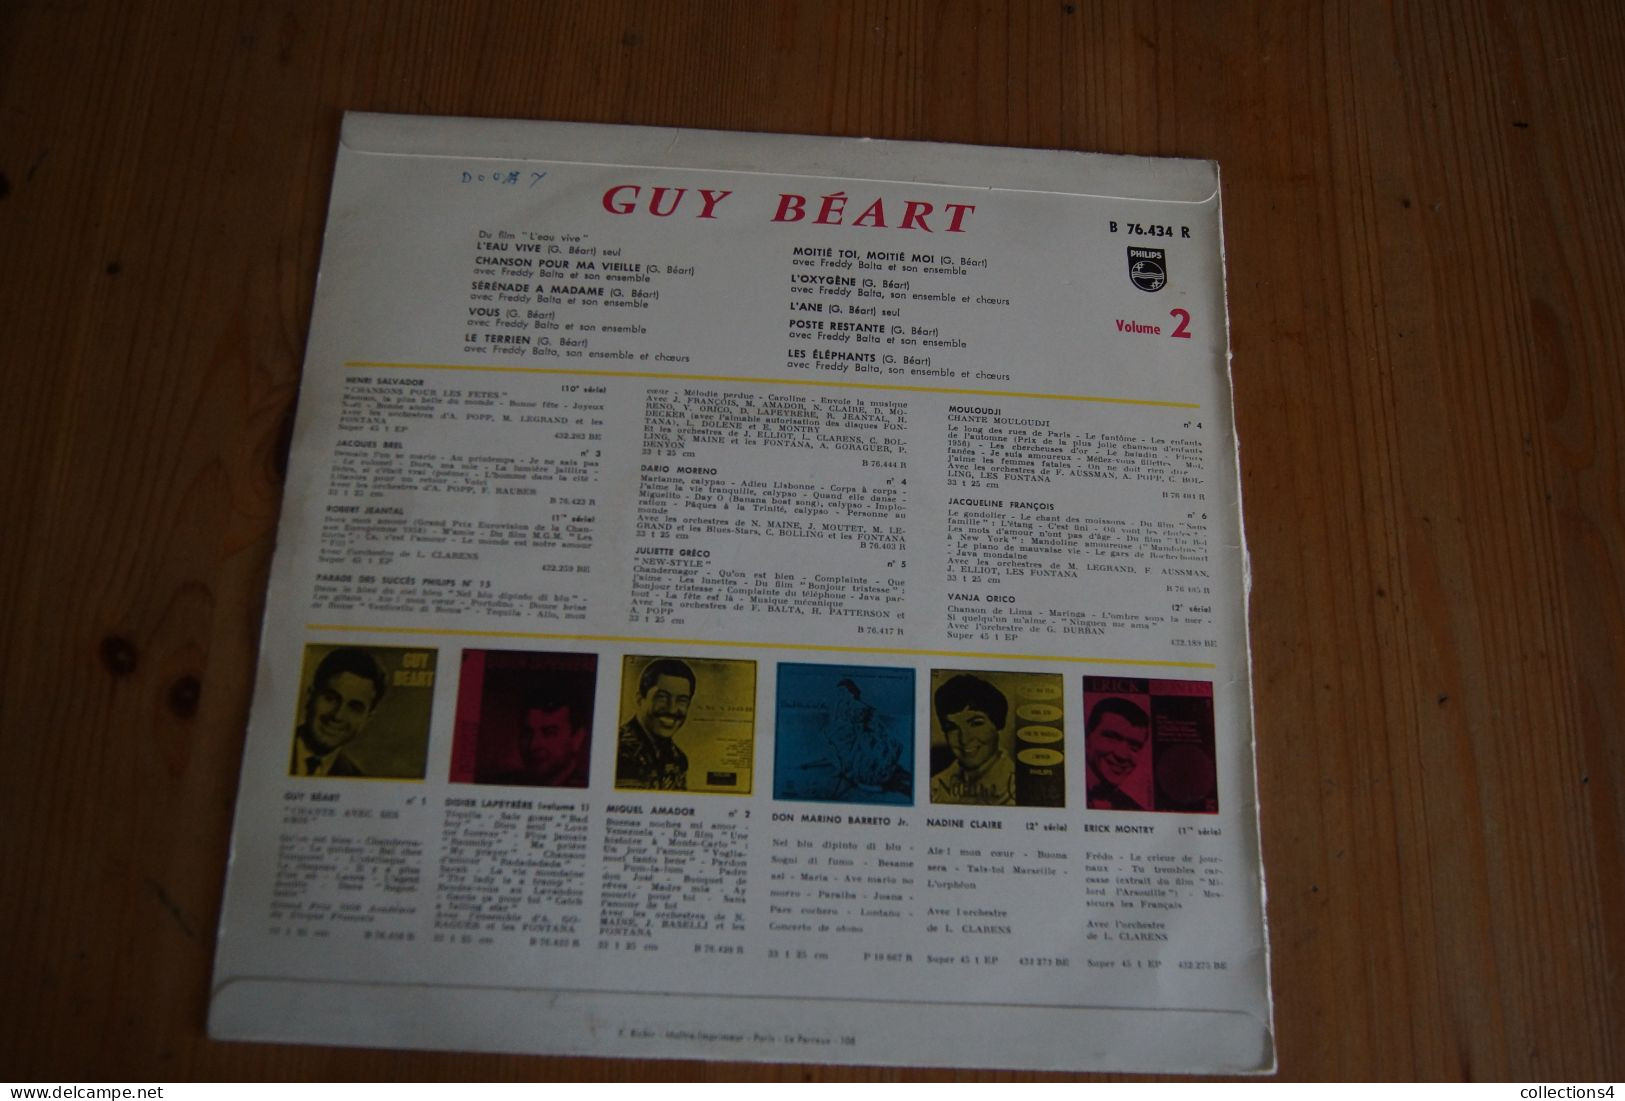 GUY BEART L EAU VIVE 25 CM 1959 - Other - French Music